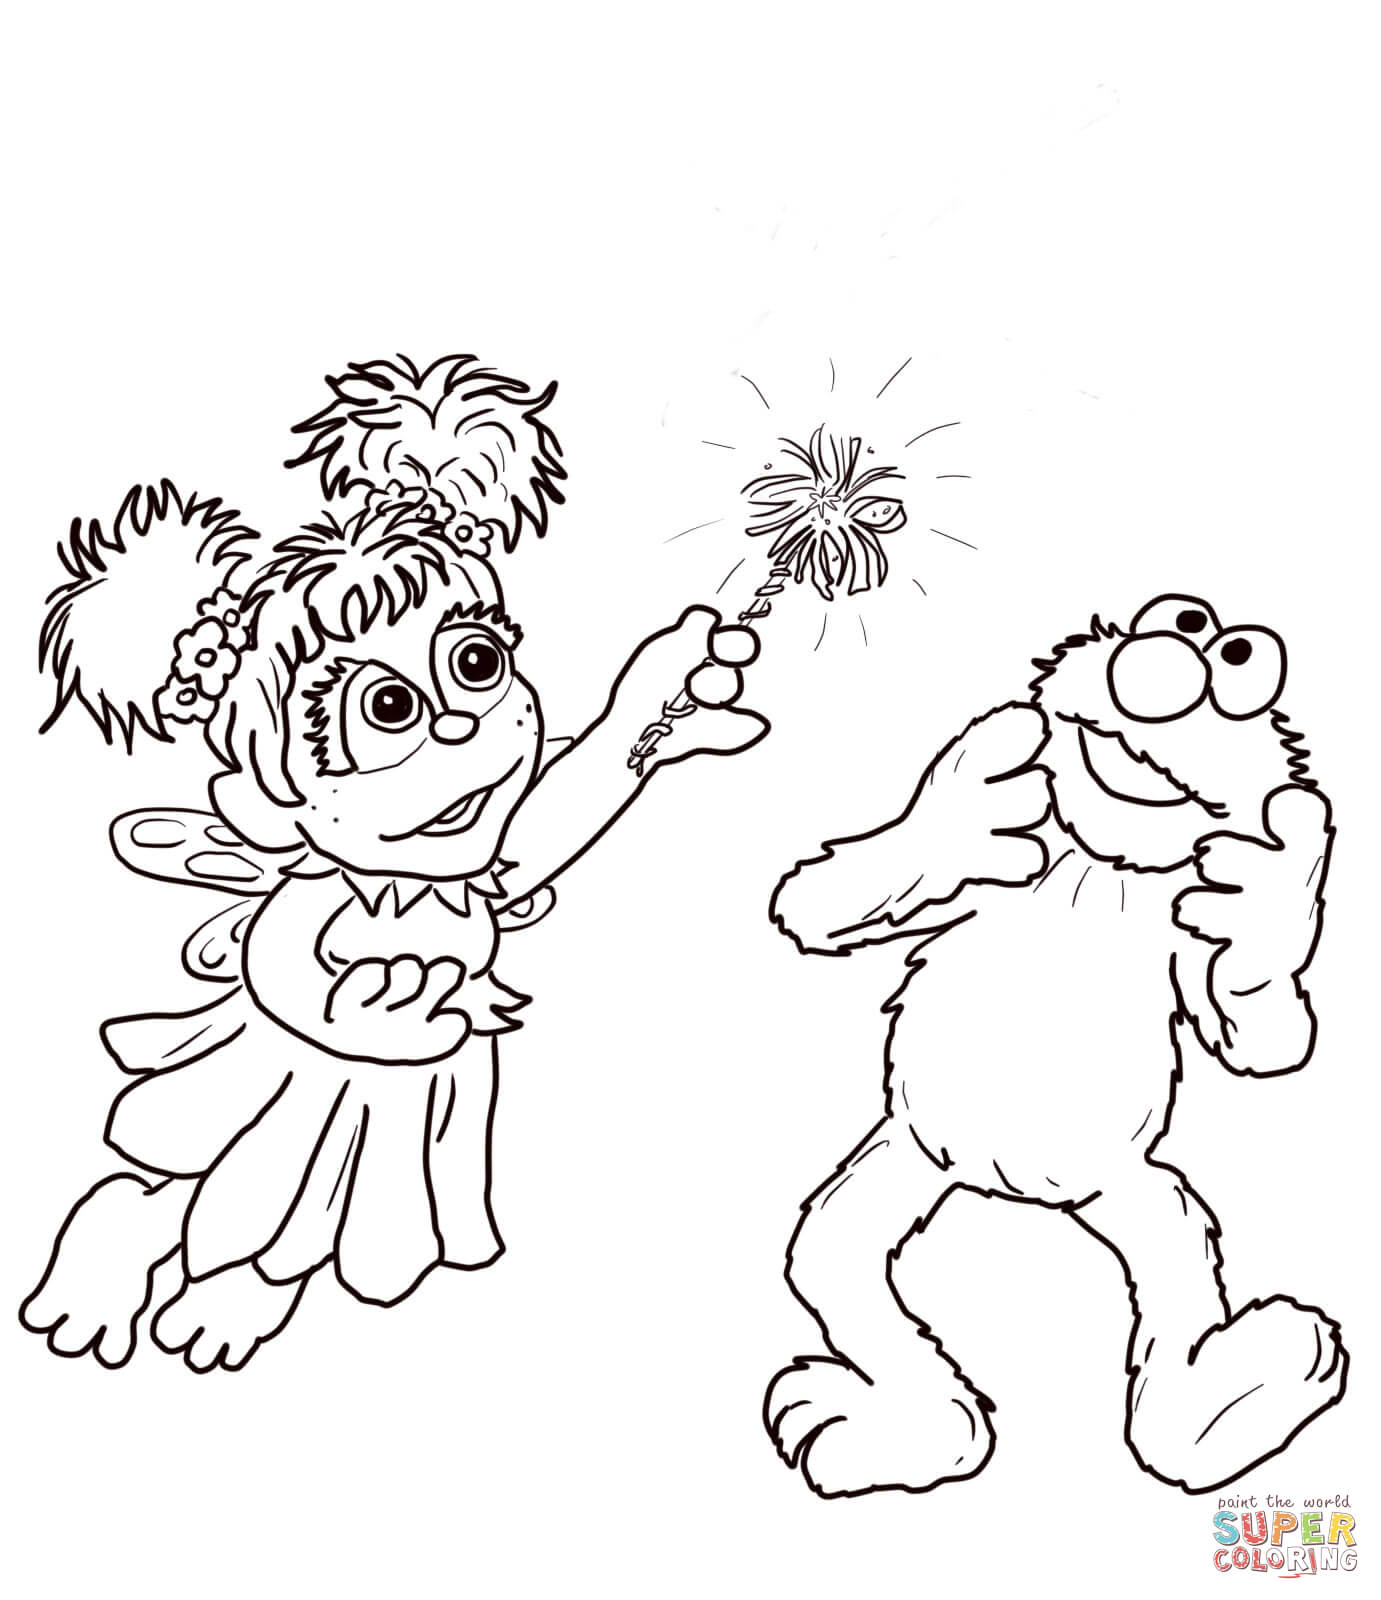 Abby Cadabby And Elmo Coloring Page | Free Printable Coloring Pages - Elmo Color Pages Free Printable